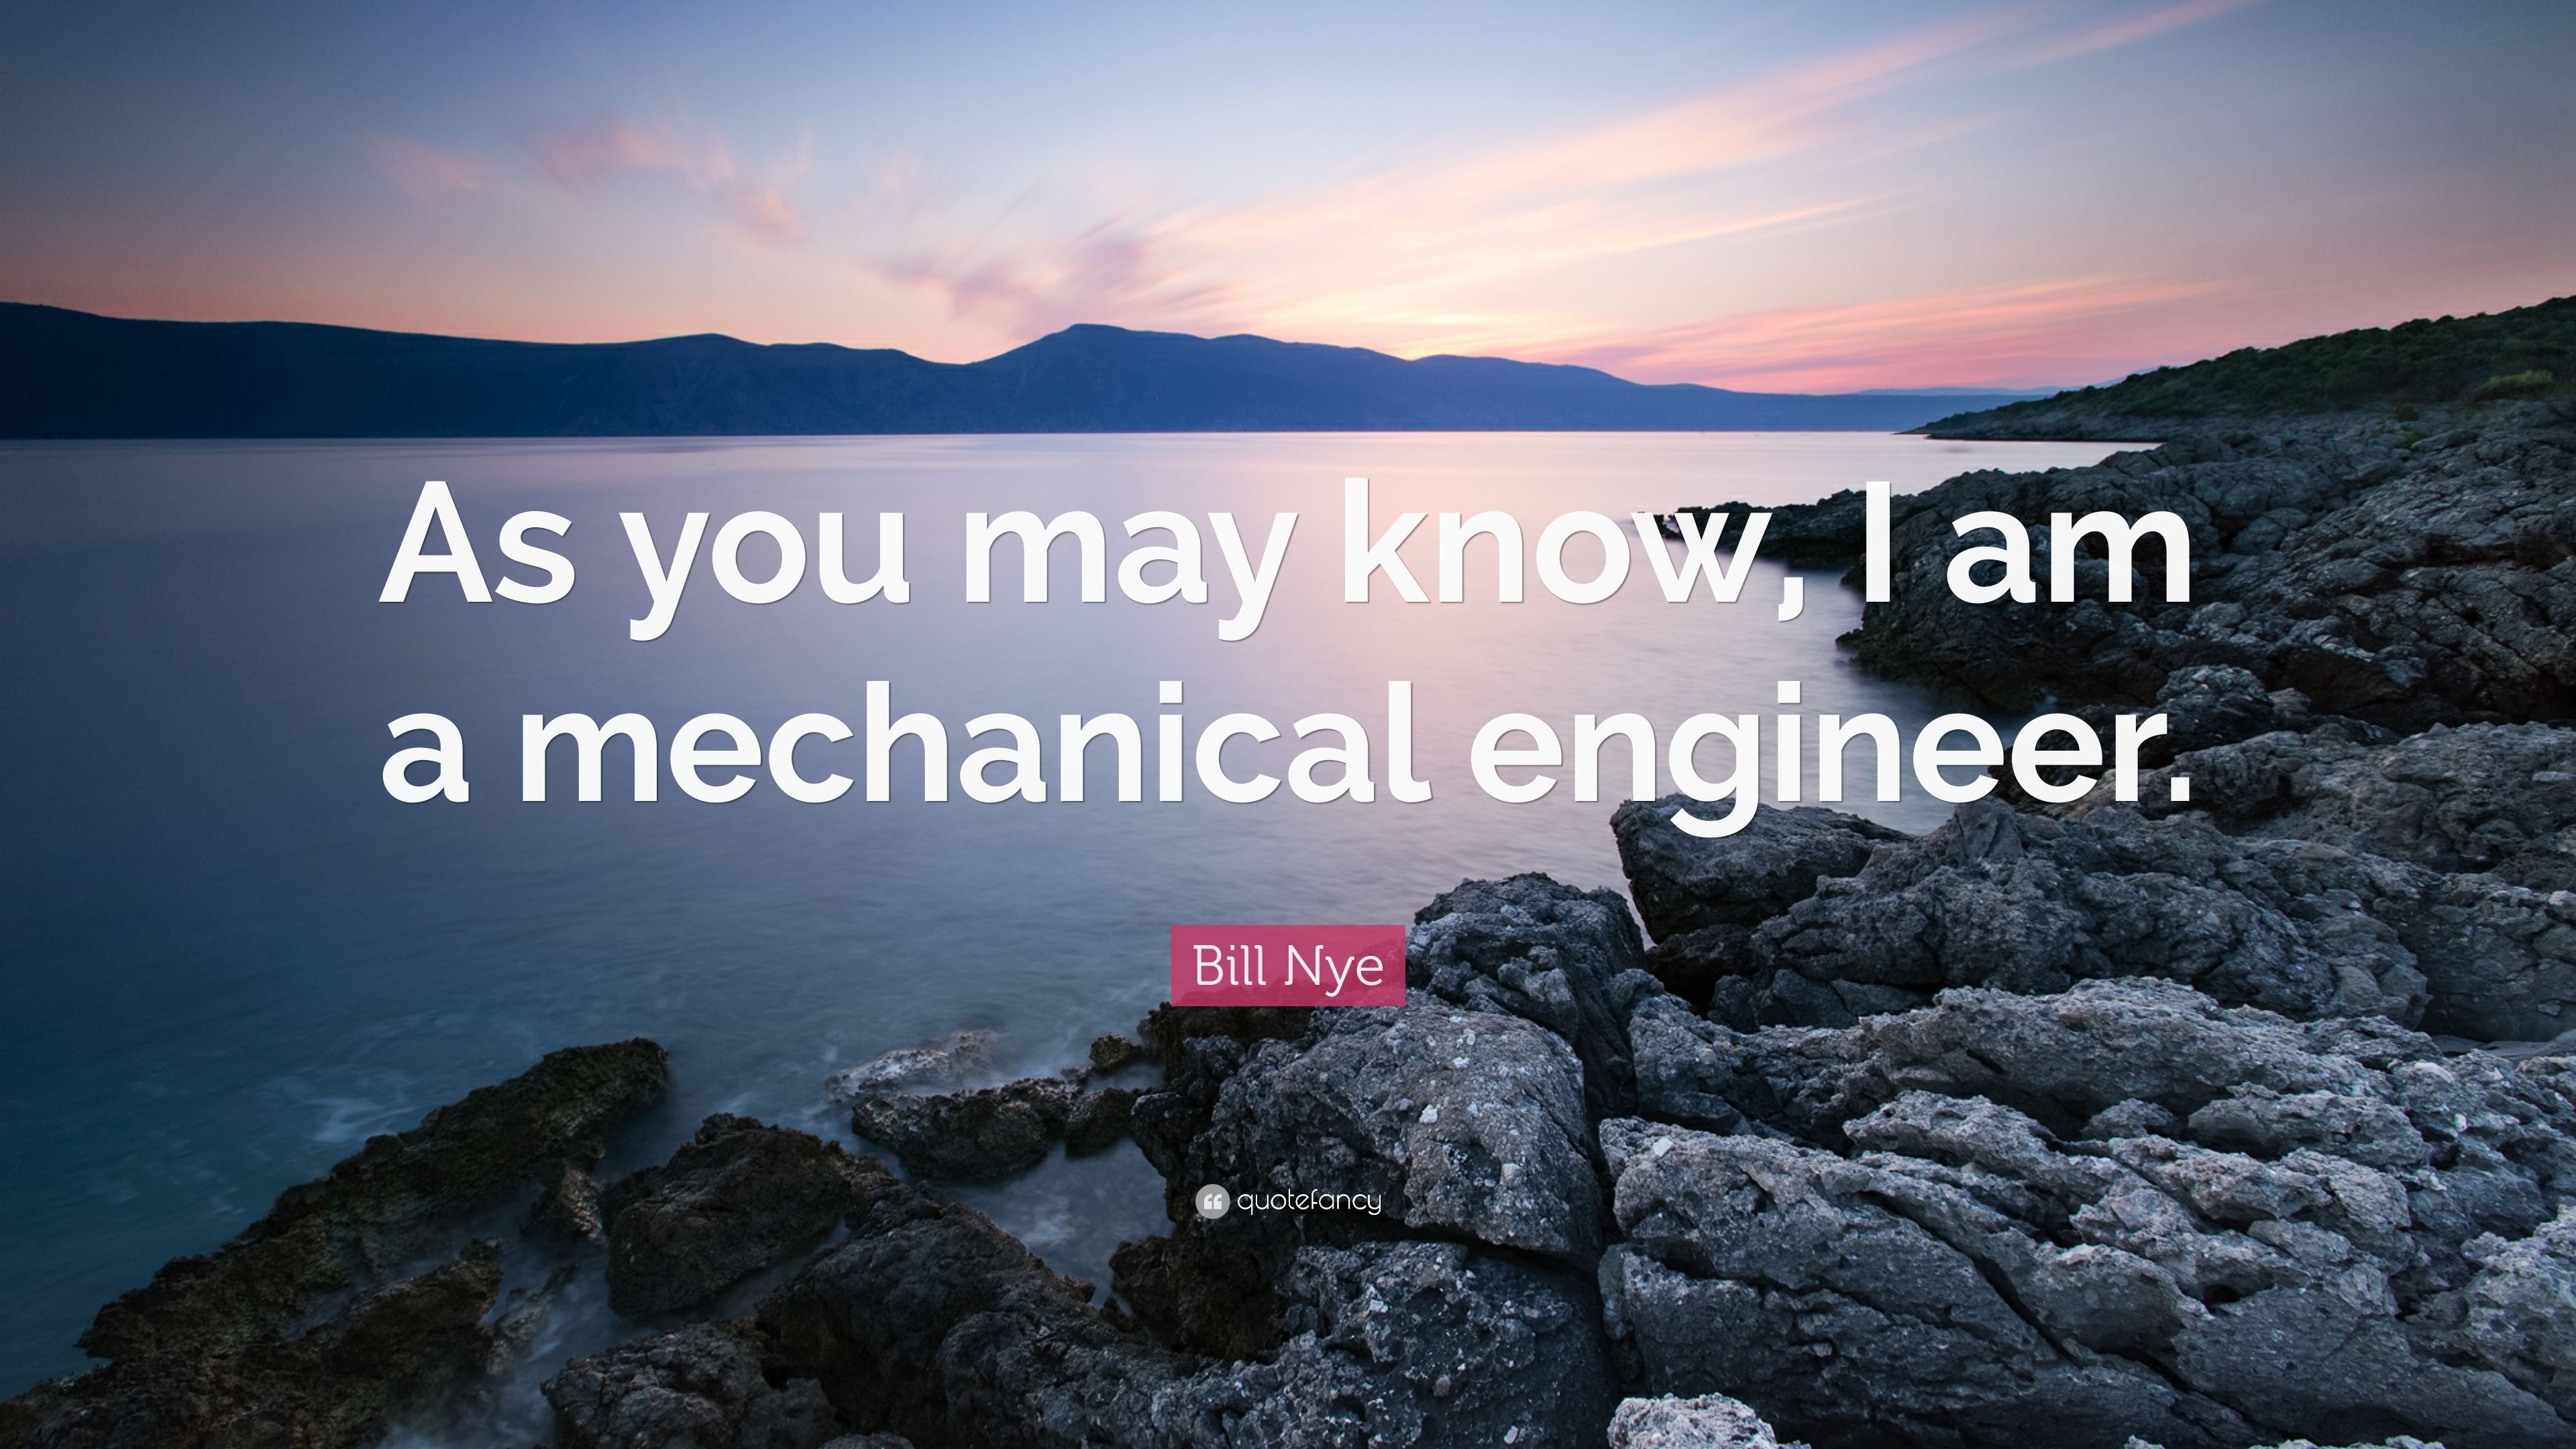 Bill Nye Quote: “As you may know, I am a mechanical engineer.” (12 wallpaper)